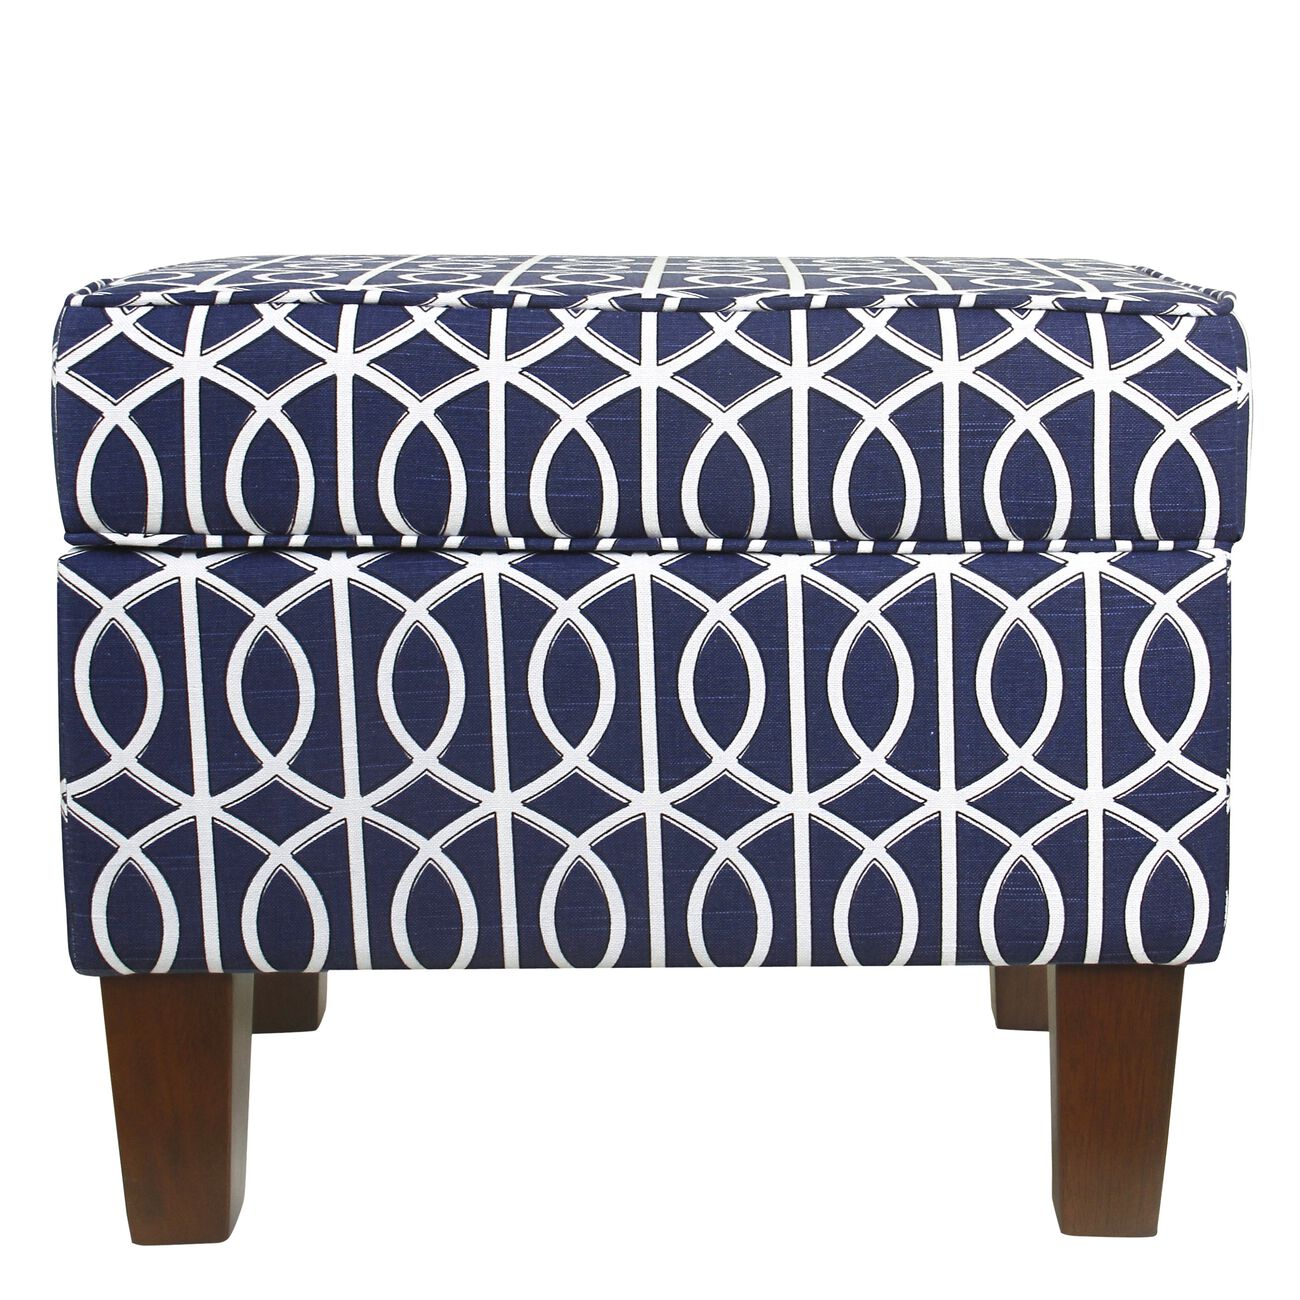 Wooden Ottoman with Trellis Patterned Fabric Upholstery and Hidden Storage, Blue and White